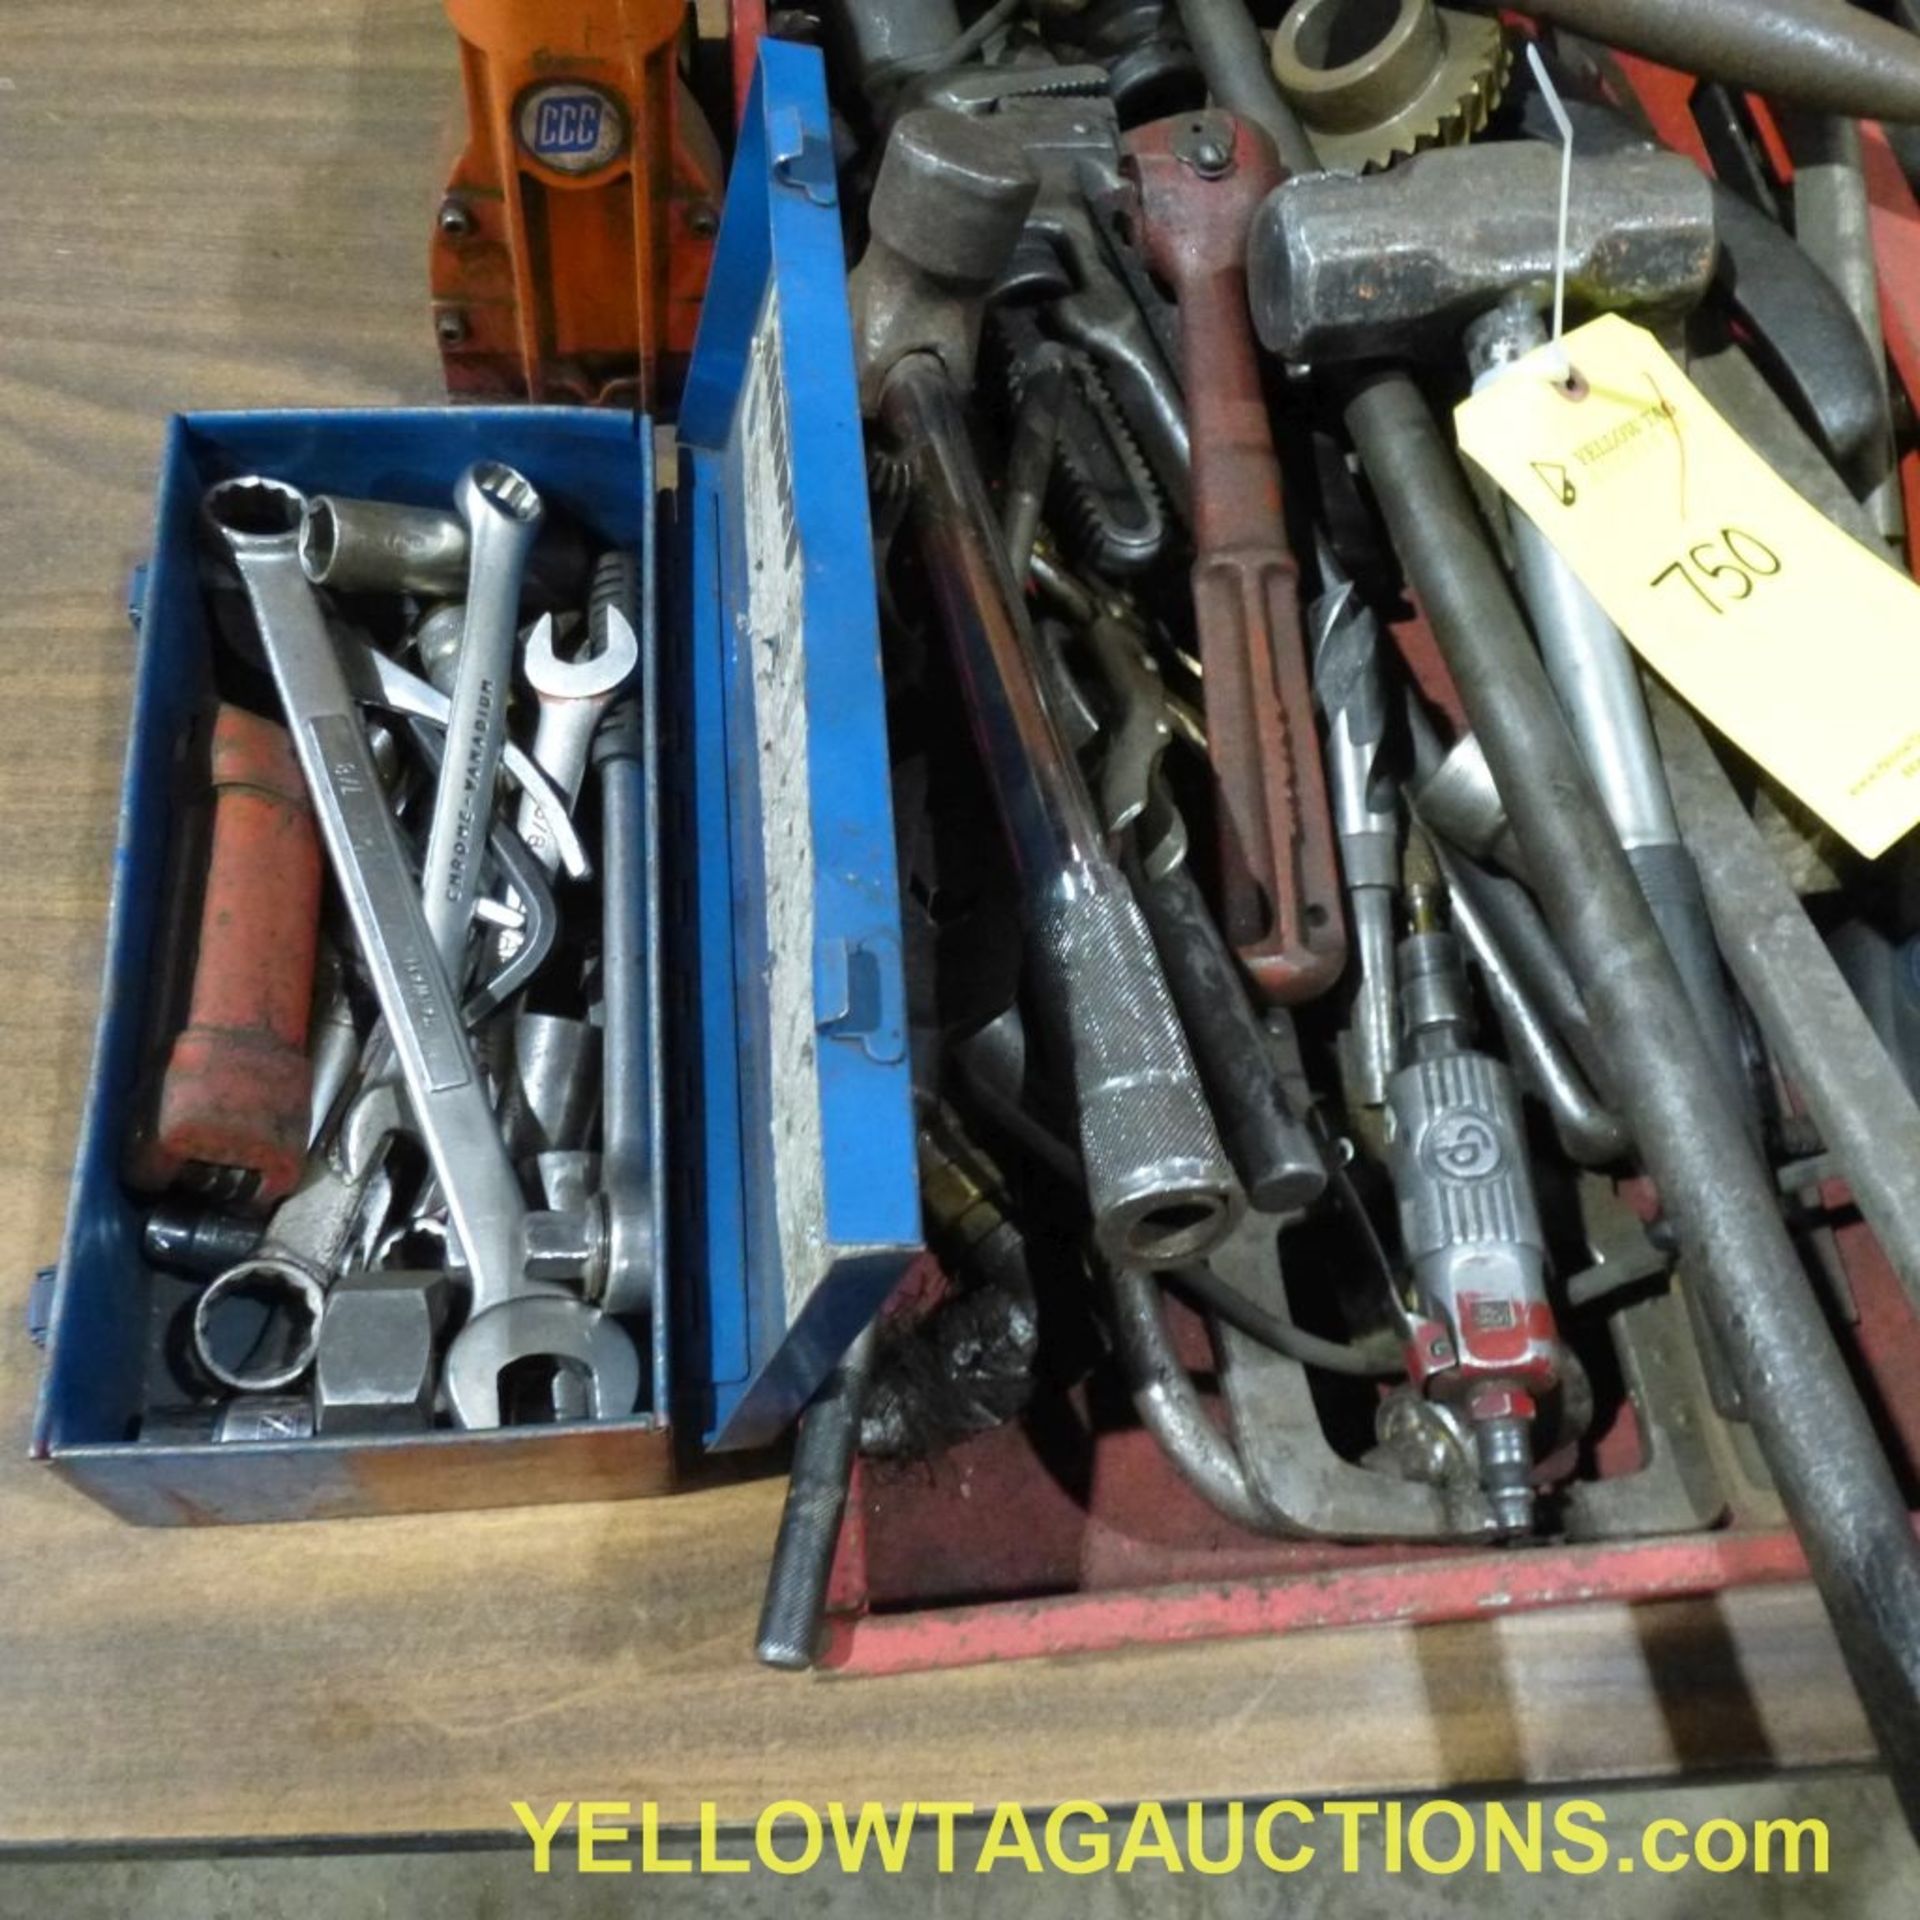 Lot of Assorted Tools|Includes: Hammers, Sockets, Visegrips, Box Stapler, Wrenches|Tag: 750 - Image 2 of 6